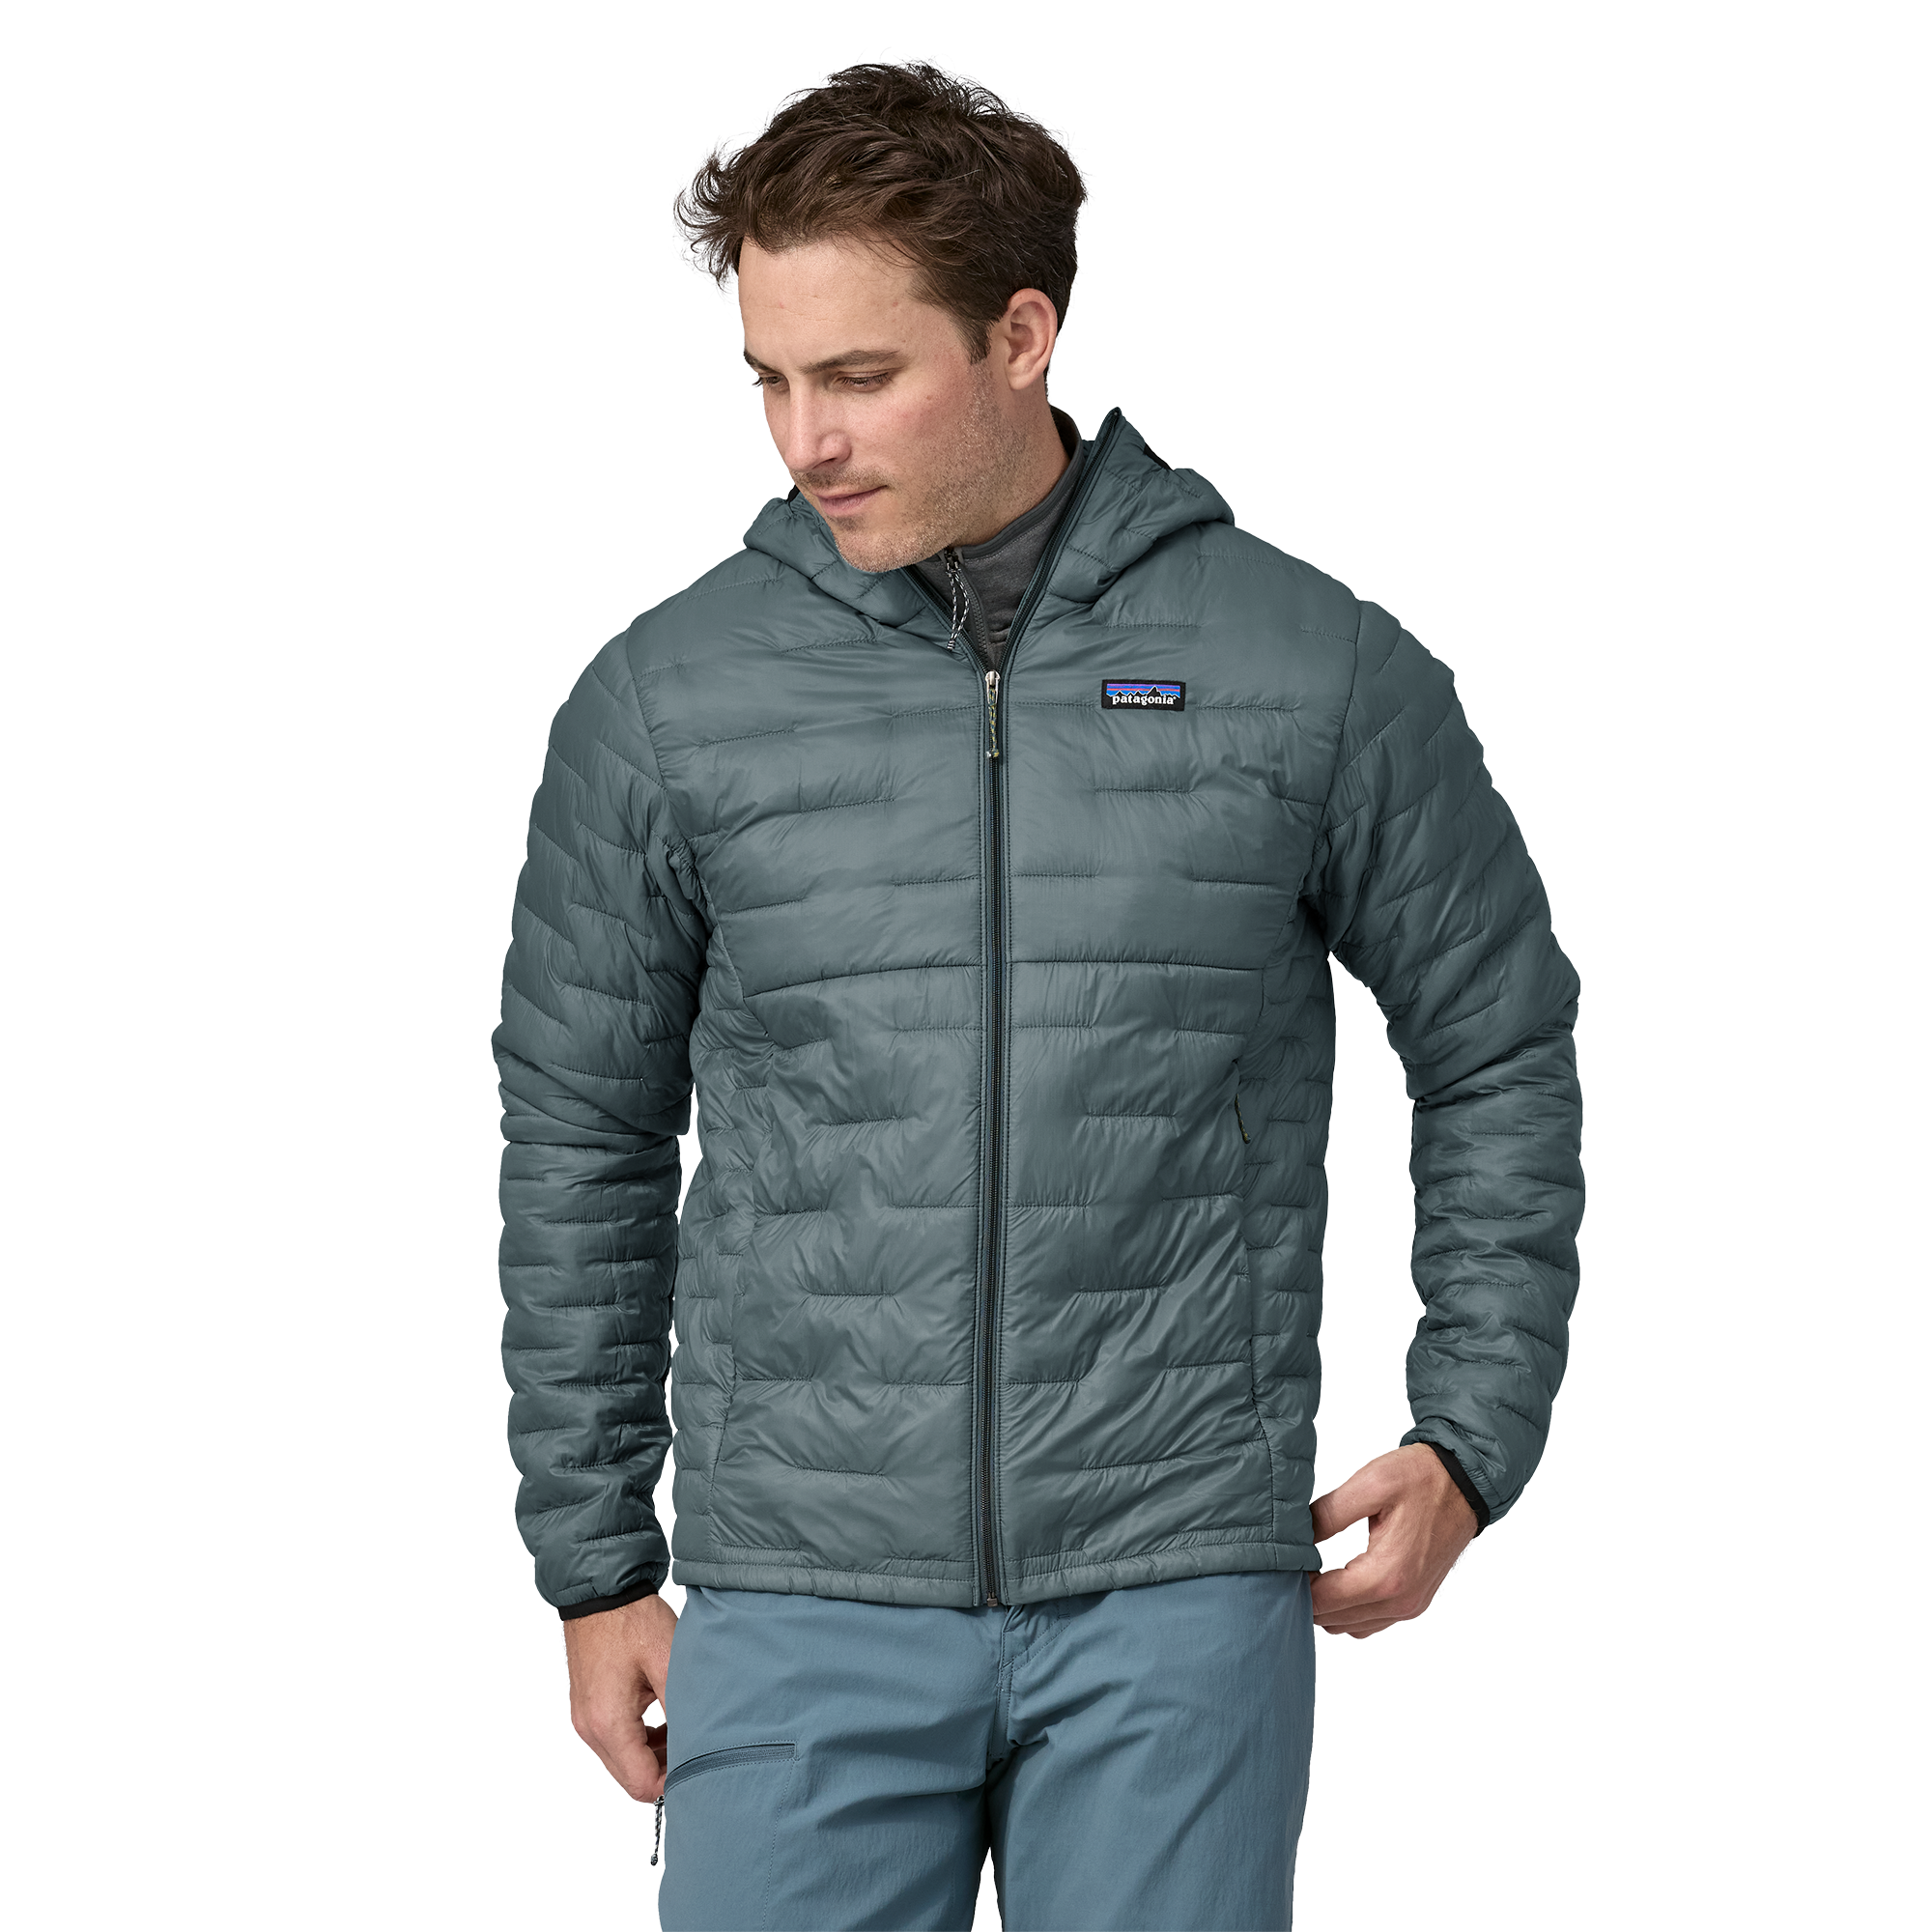 Save 40%: The Patagonia Micro Puff Jacket Is on Sale Now